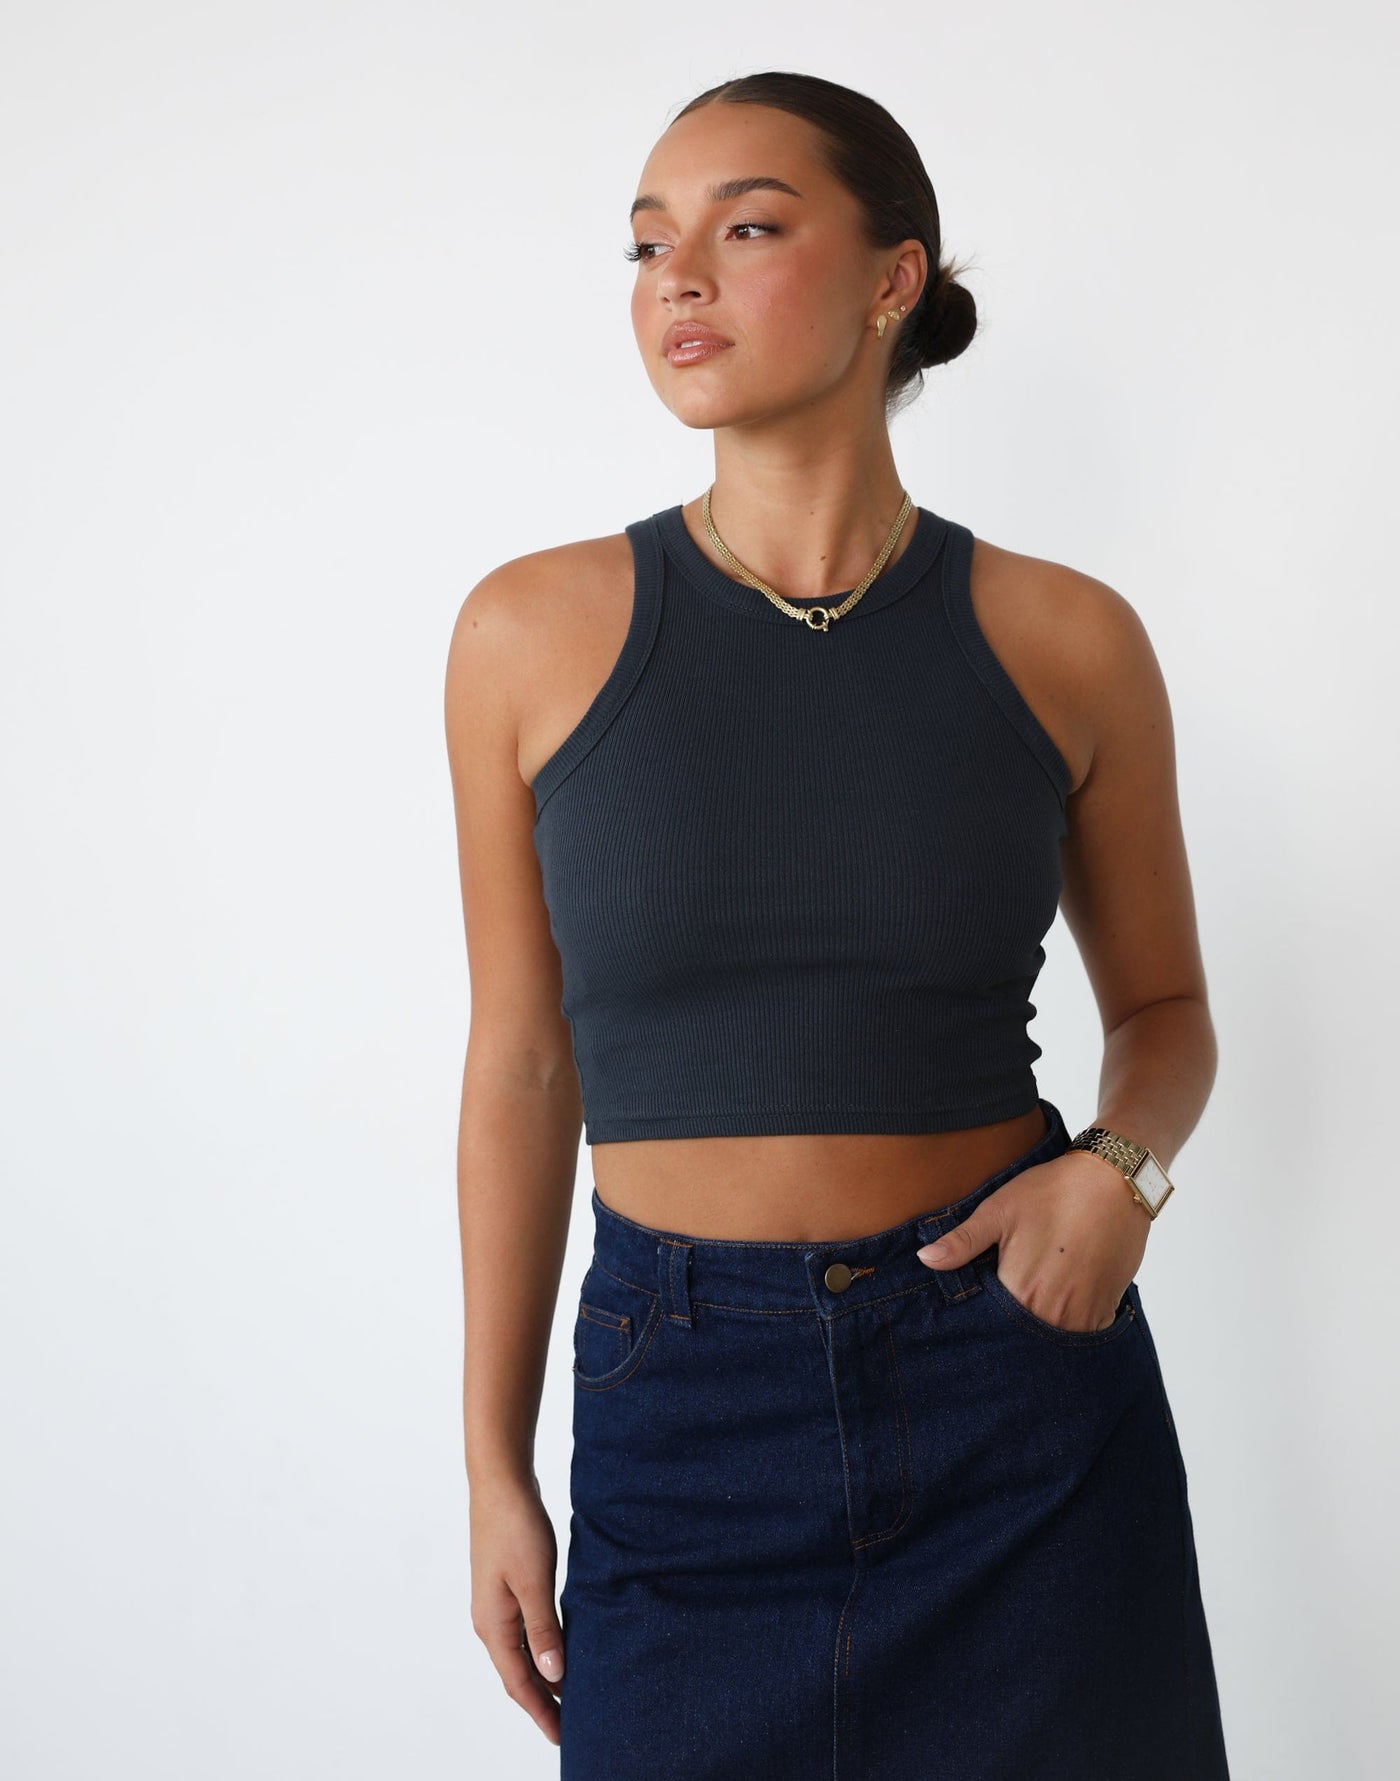 Kennedy Tank Top (Midnight Blue) - Basic Round Neck Crop Top - Women's Top - Charcoal Clothing